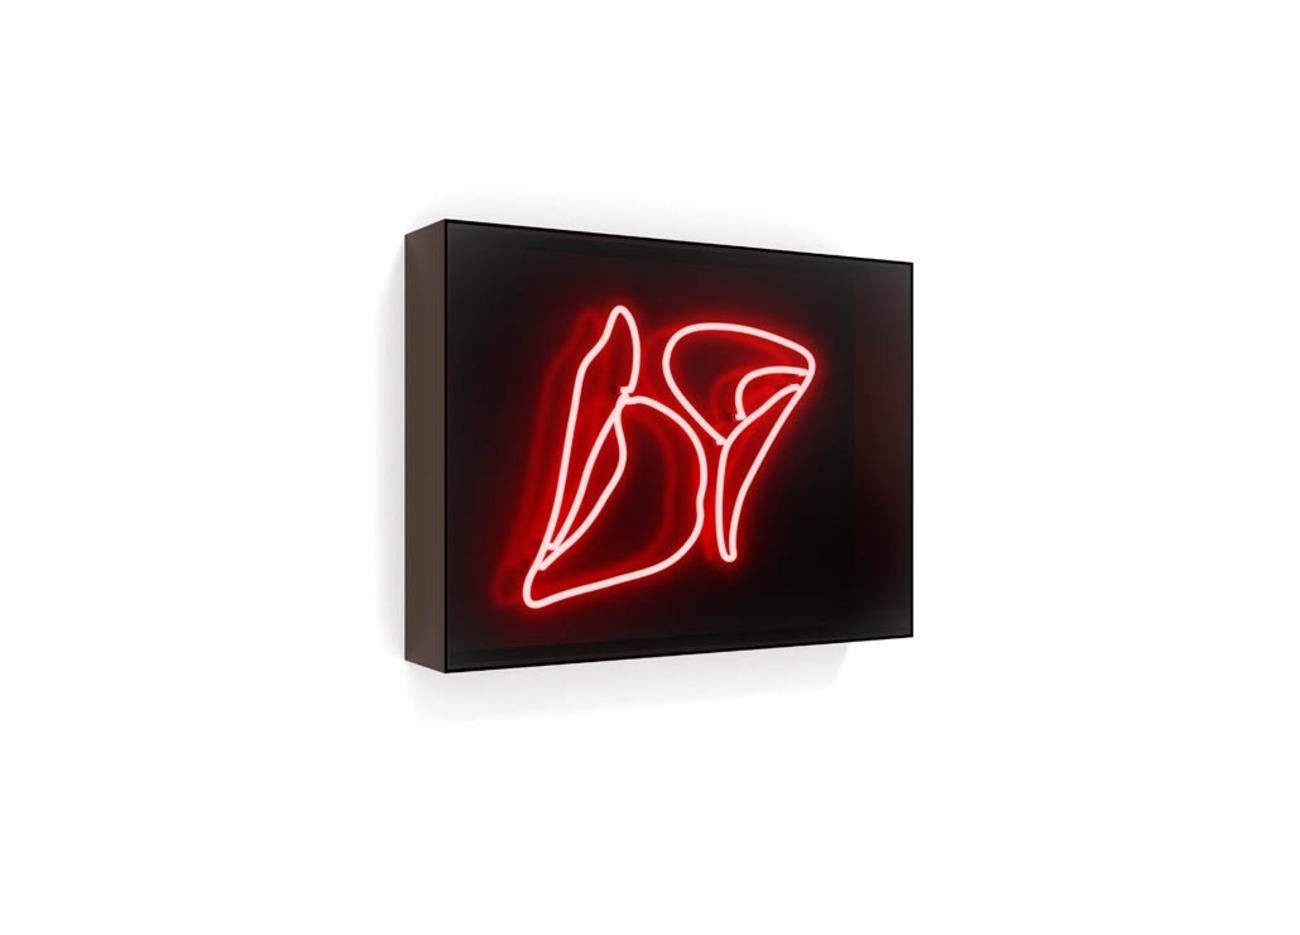 Series: Neon
30" x 40" x 6" - Edition of 9

Disarmingly blunt and intensely intimate, David Drebin's neon light installations illuminate hidden aspirations and secret thoughts of the femmes fatales who inhabit the elusive world of his iconic